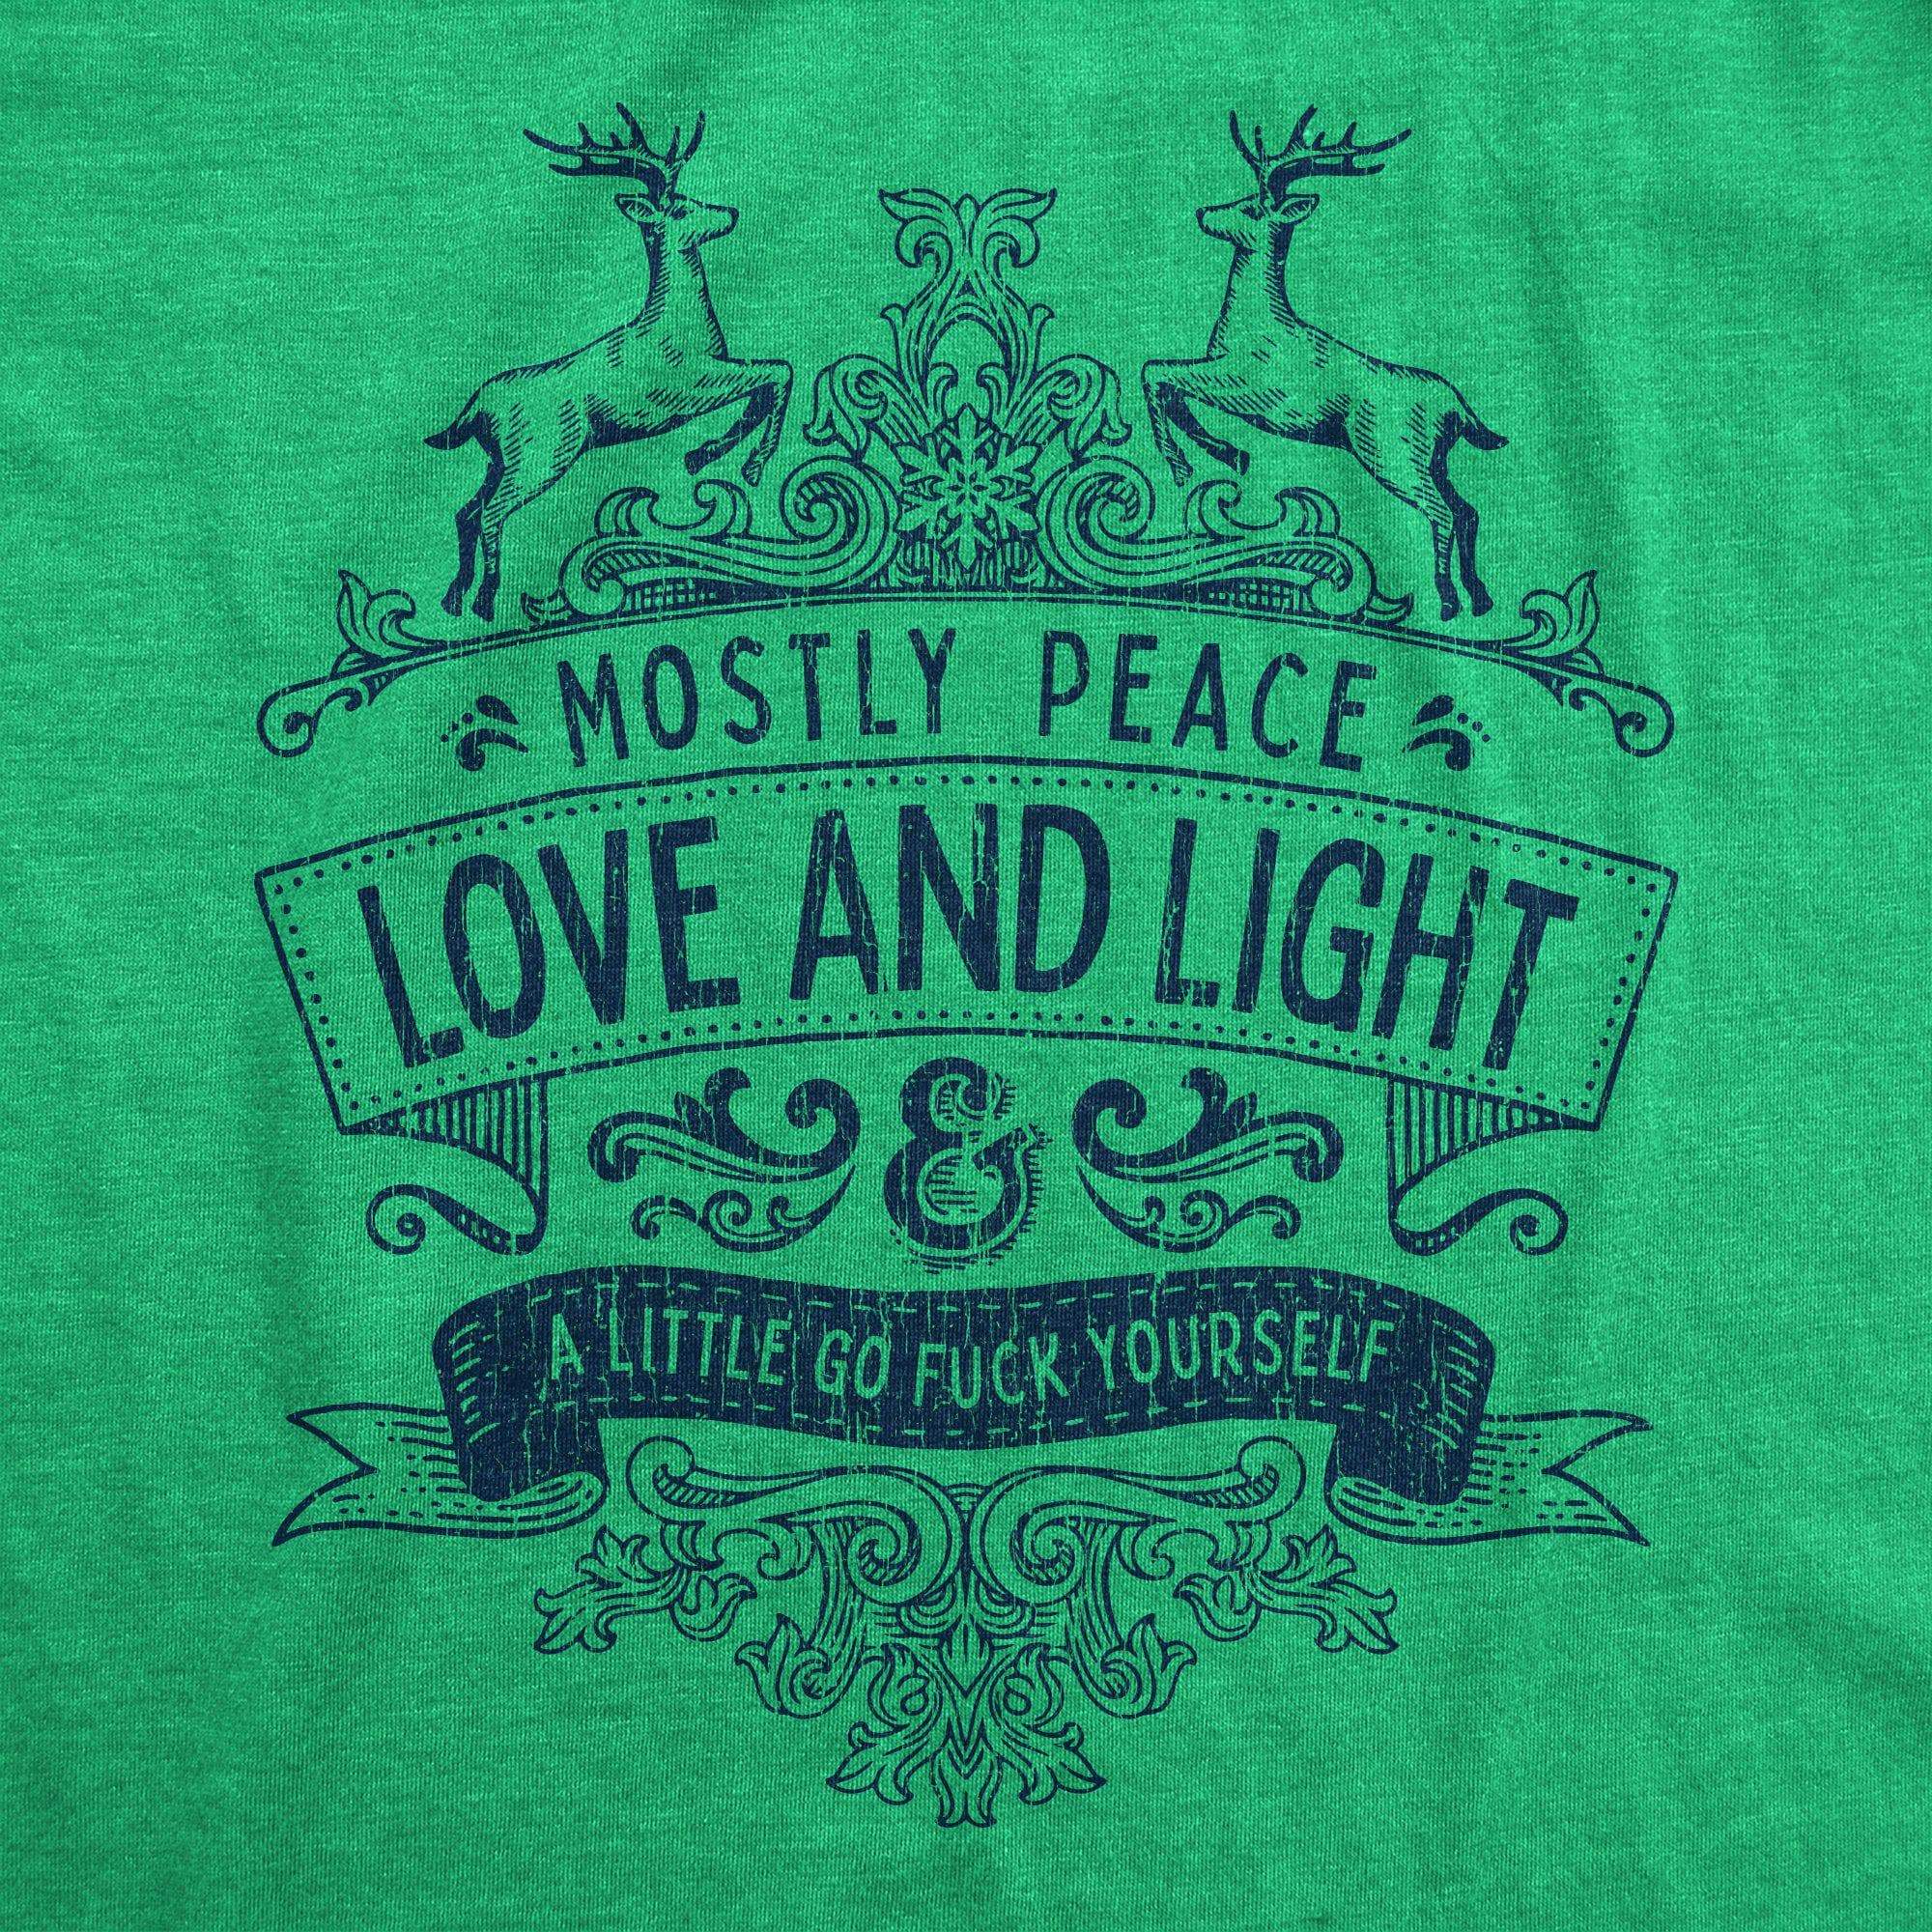 Mostly Peace Love And Light A Little Go Fuck Yourself Women's Tshirt - Crazy Dog T-Shirts